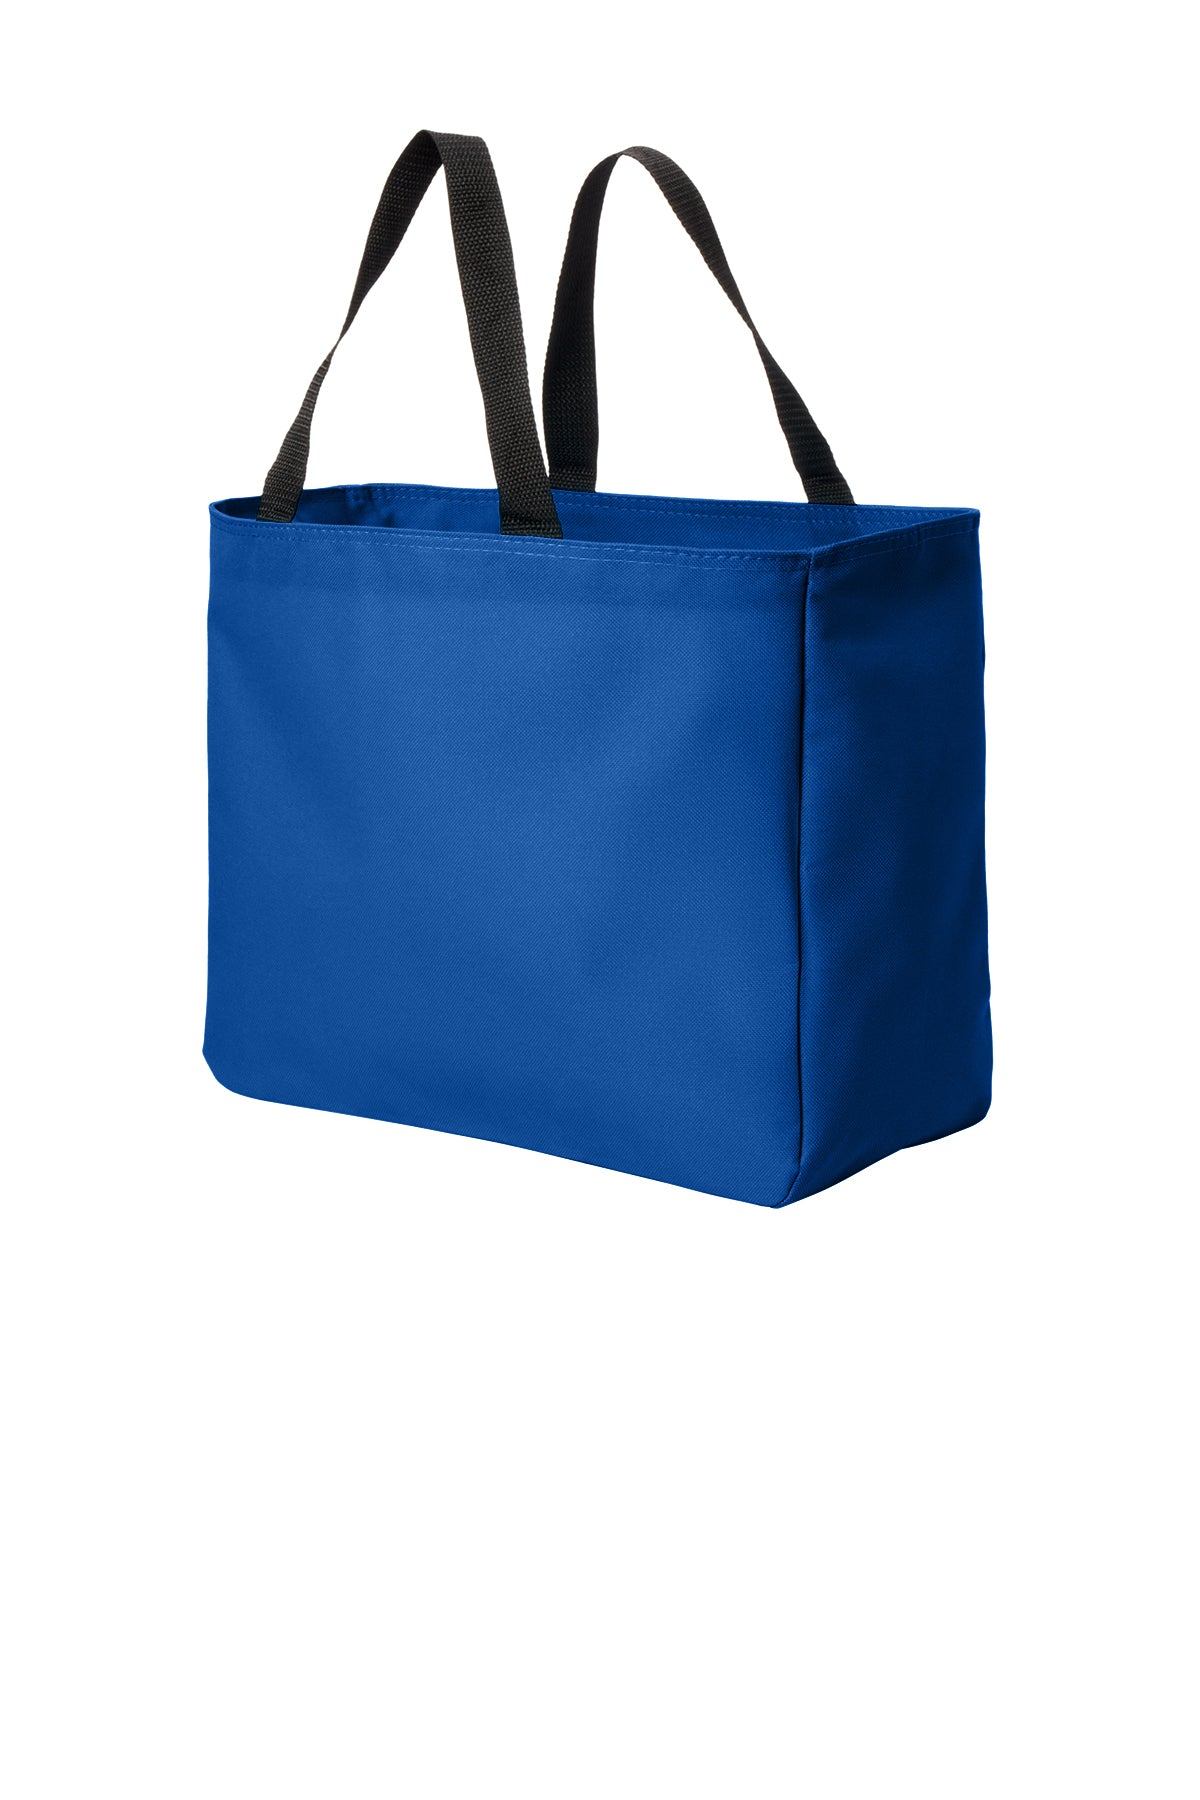 Port Authority - Essential Customized Tote, Royal